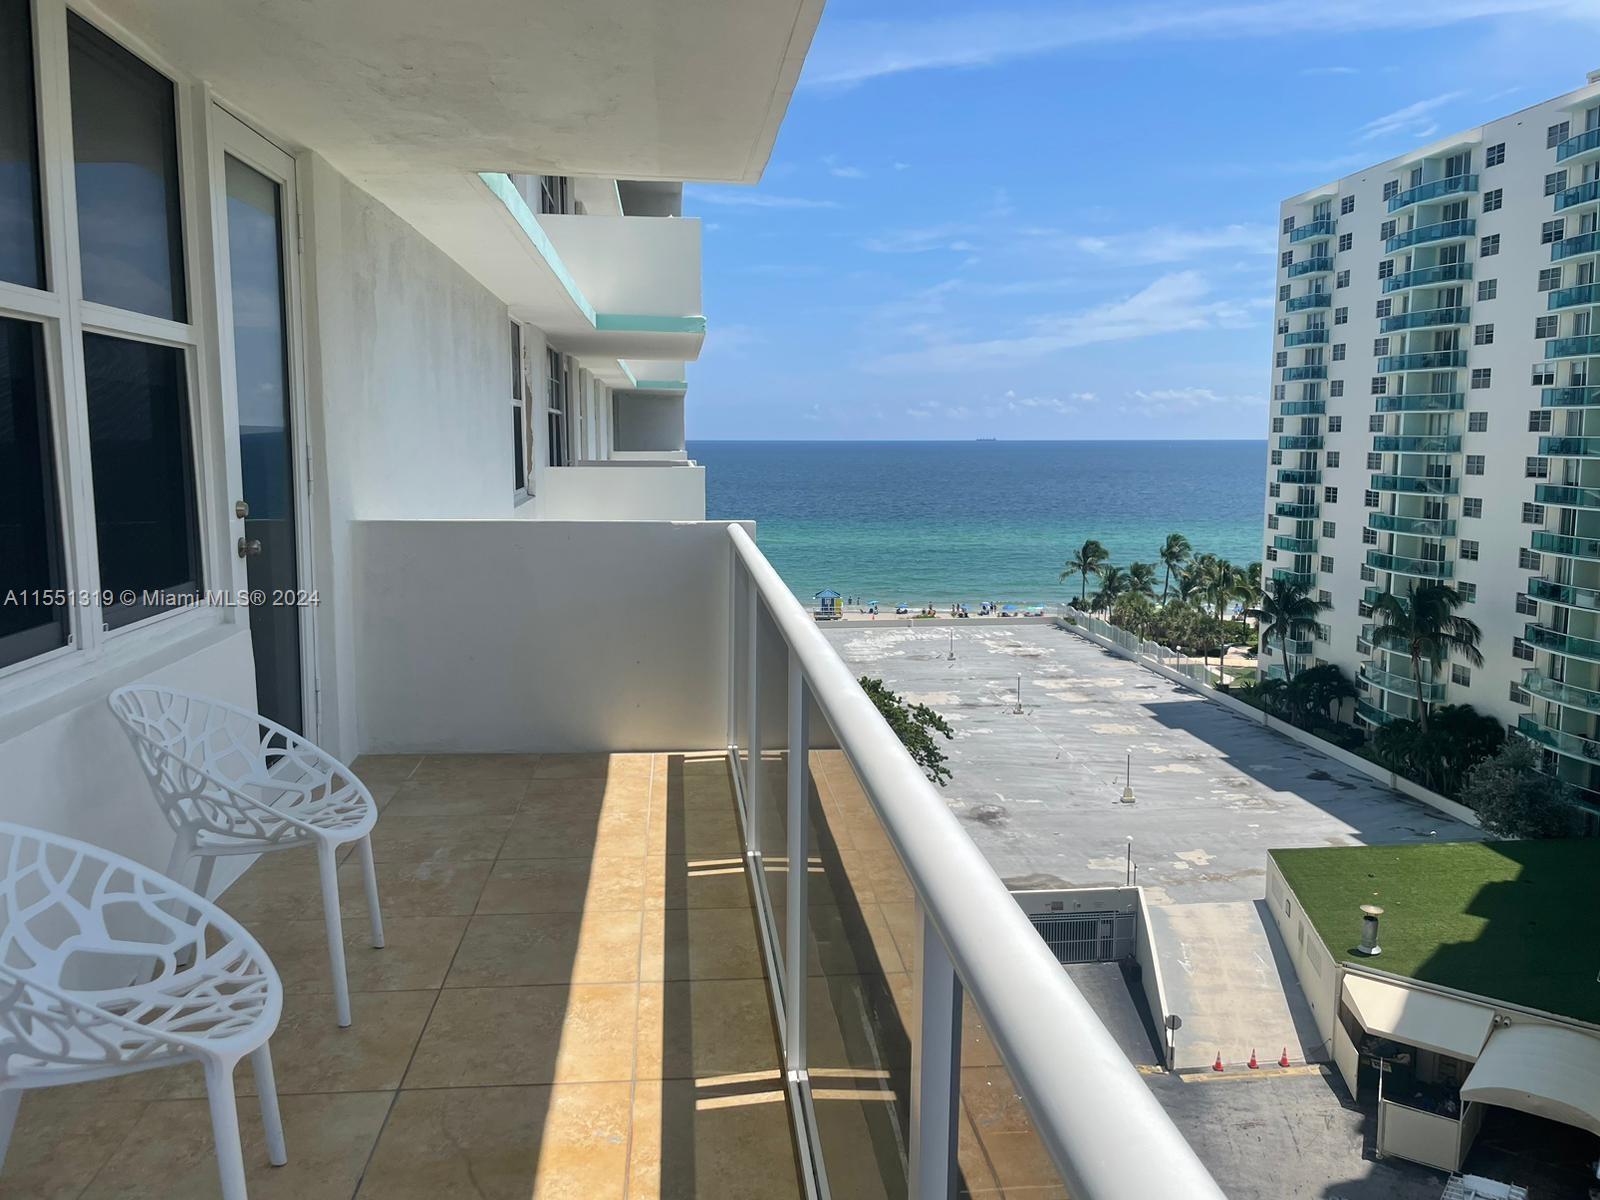 Beautifully upgraded condo in the heart of Hollywood Beach! This stunning residence features 2 spaci